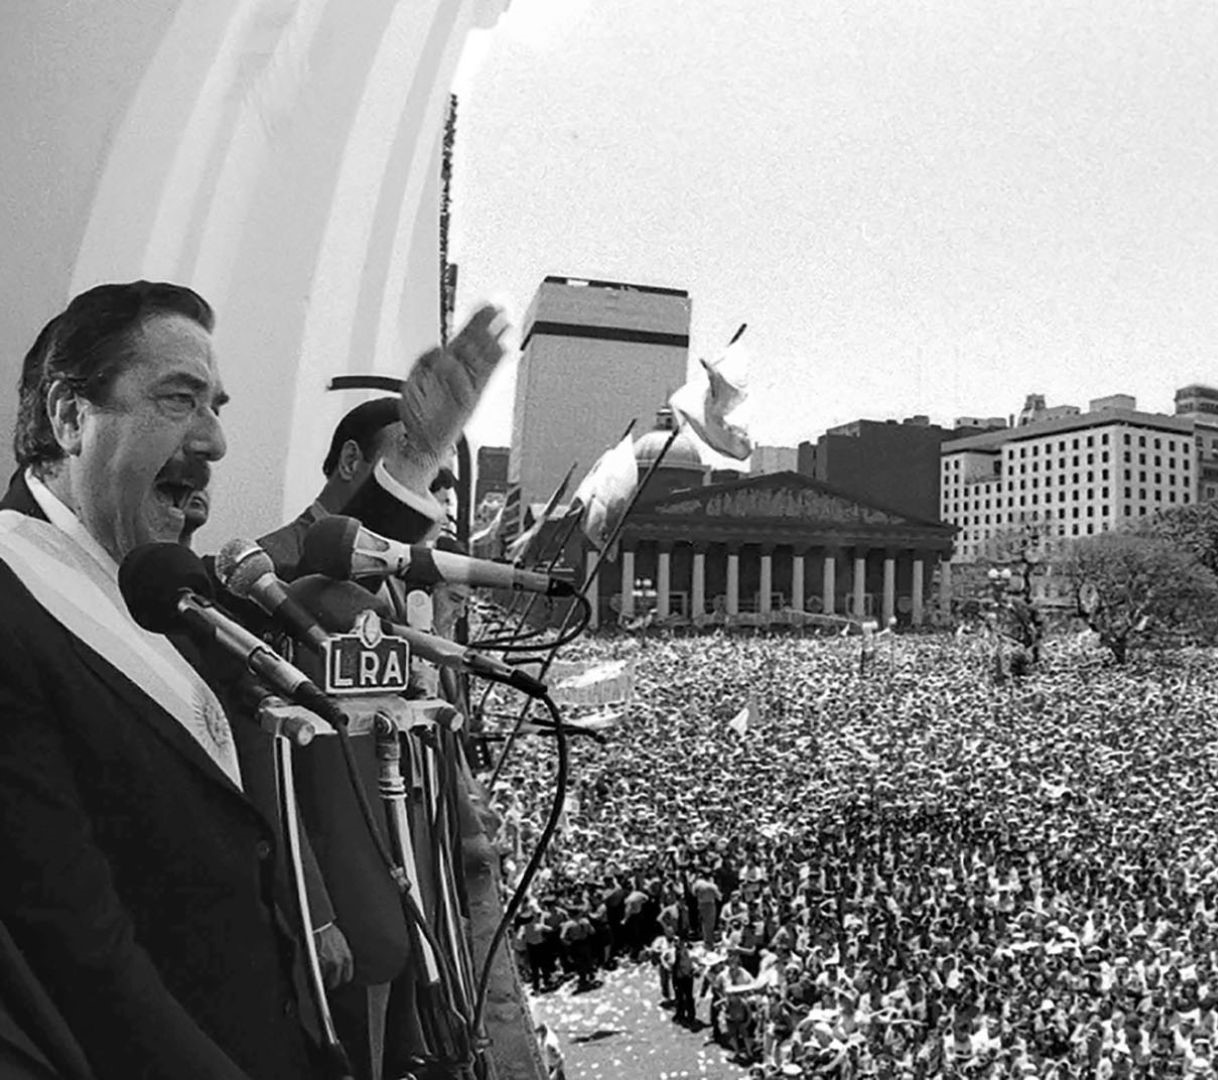 40 years later, a look back at the day Argentina recovered democracy